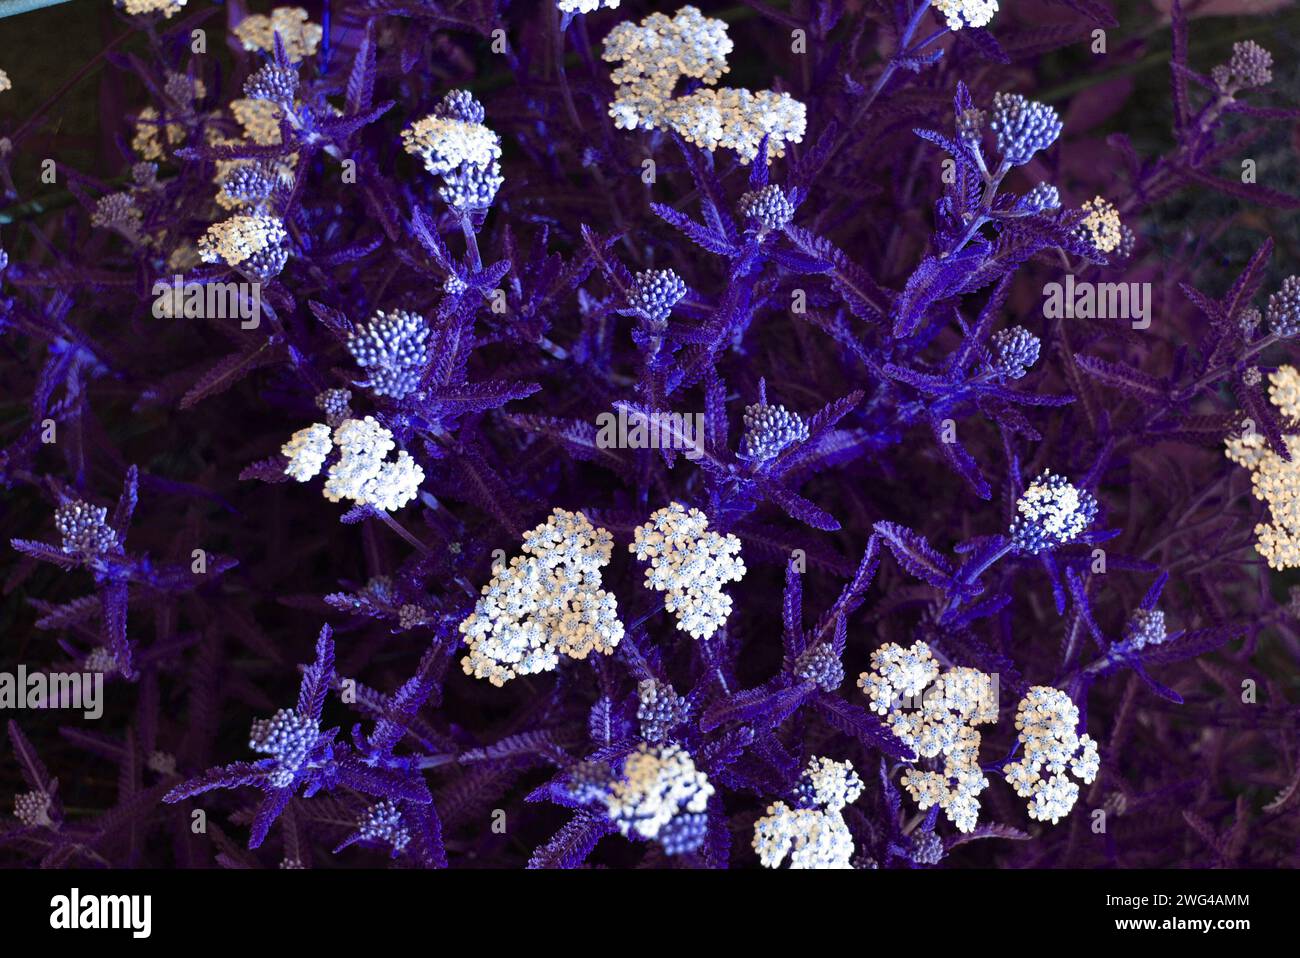 Art photo of beautiful and diverse medicinal white flowers in interesting colors and an unusual palette. Stock Photo